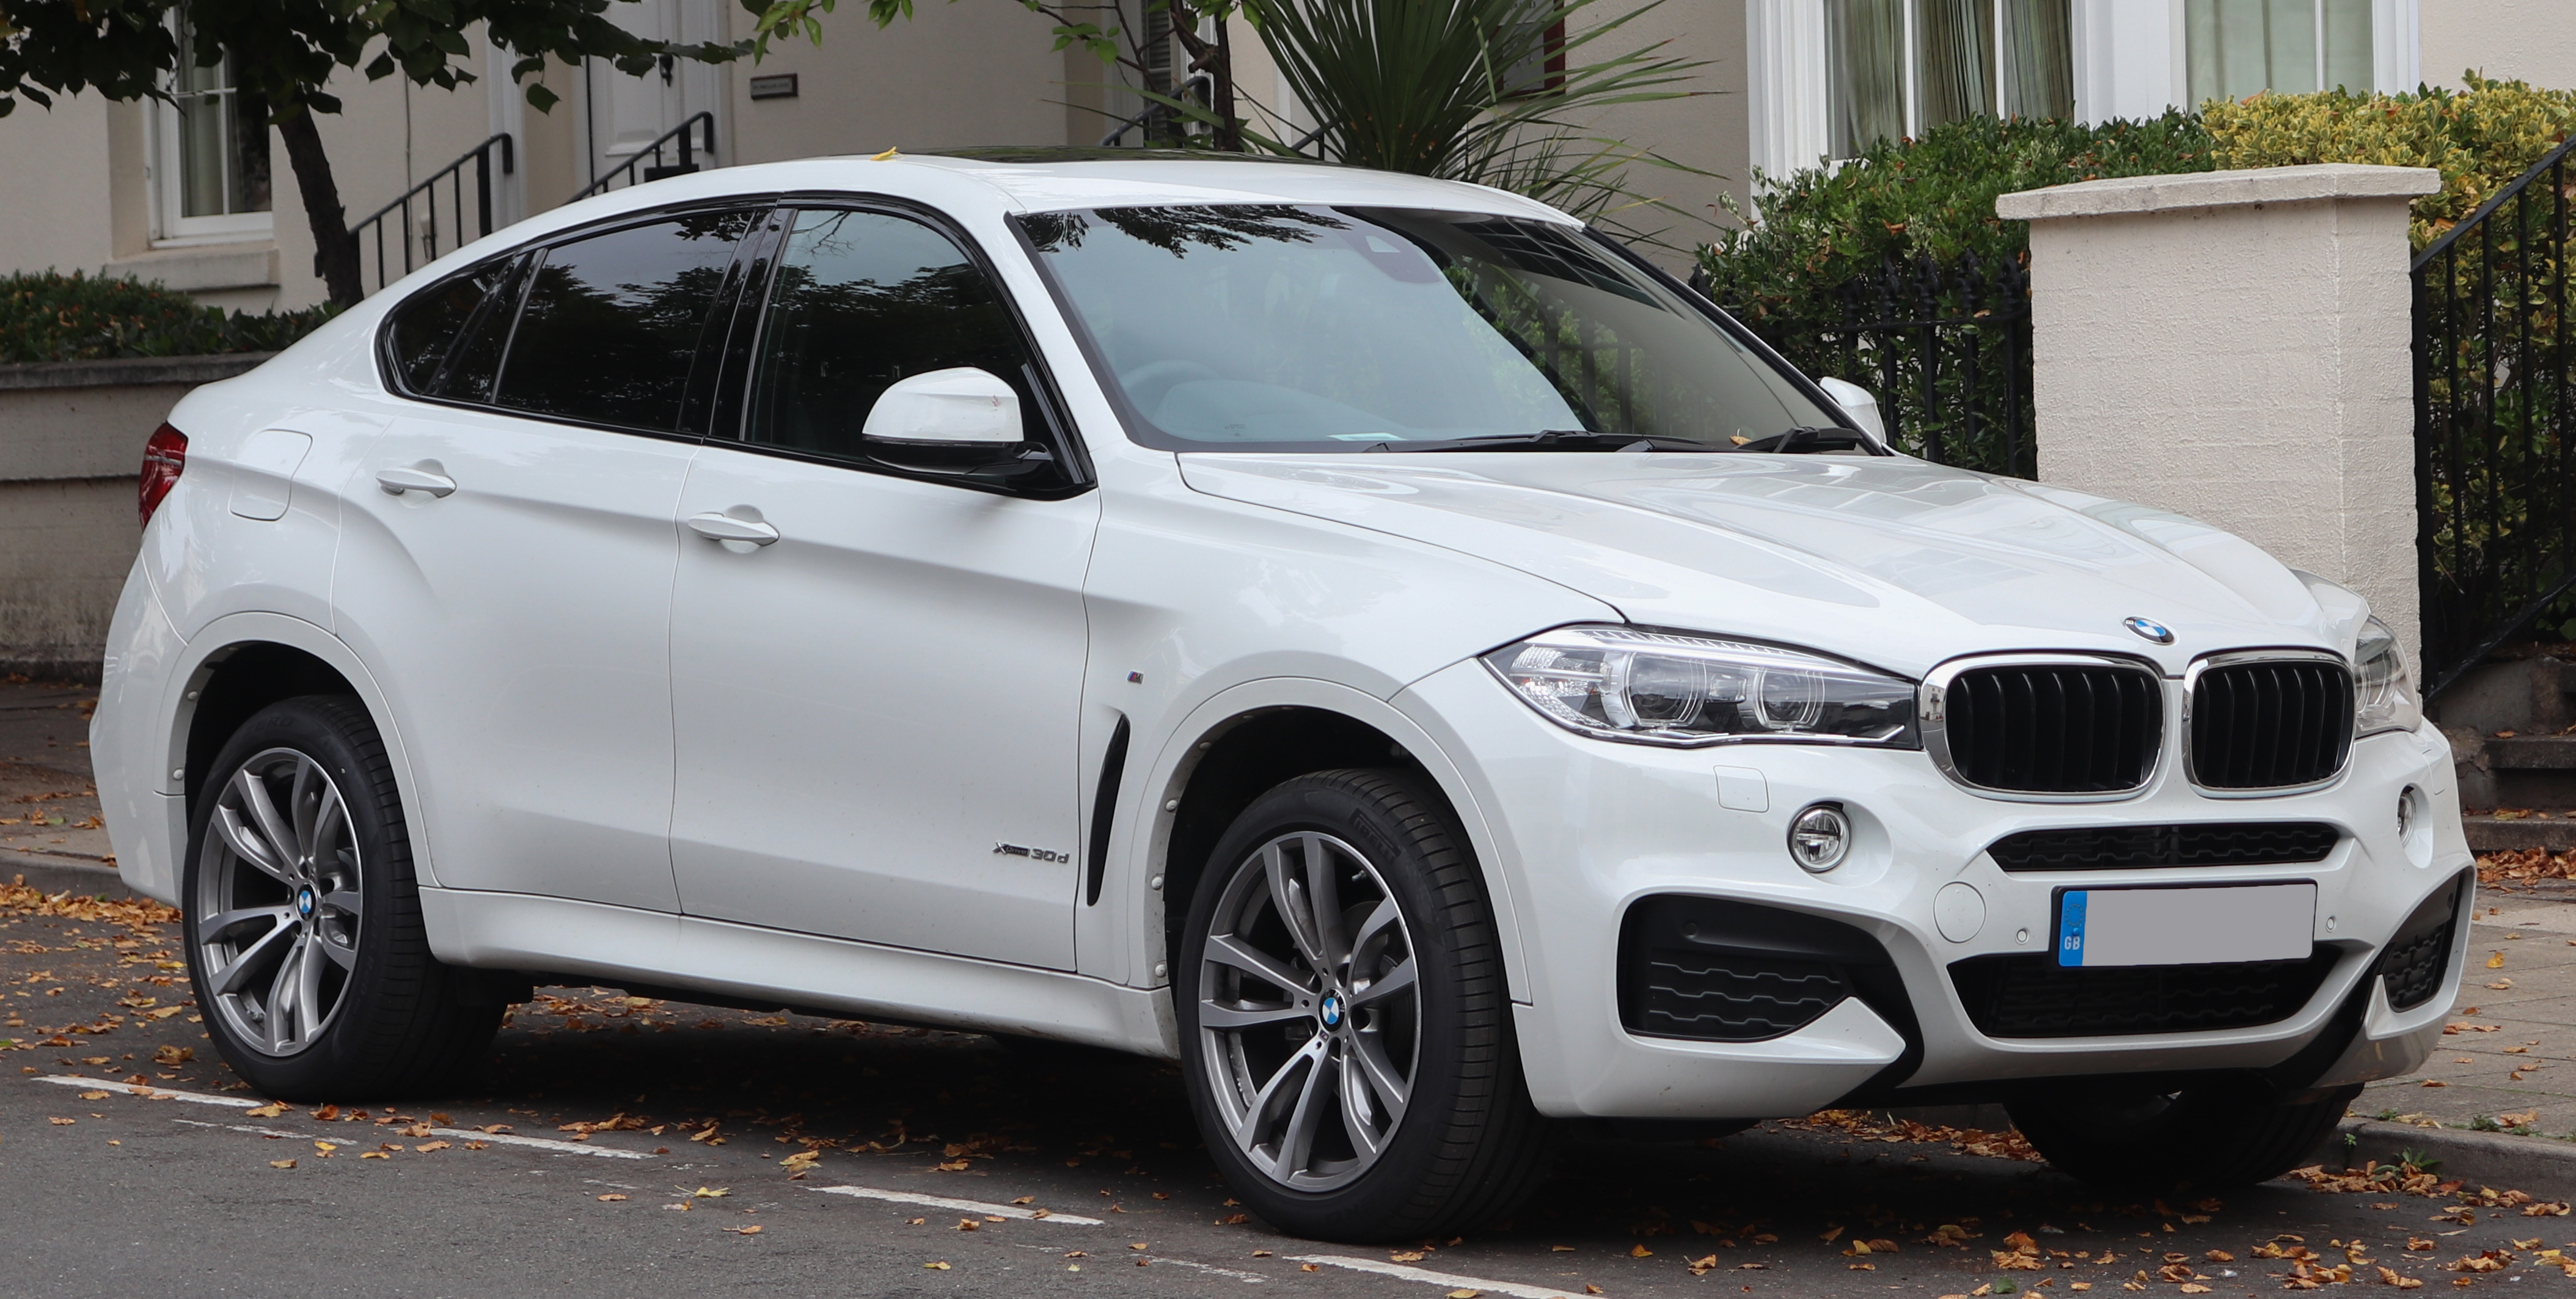 BMW X6 Car Mileage, Engine, Price, Safety and Features, Space